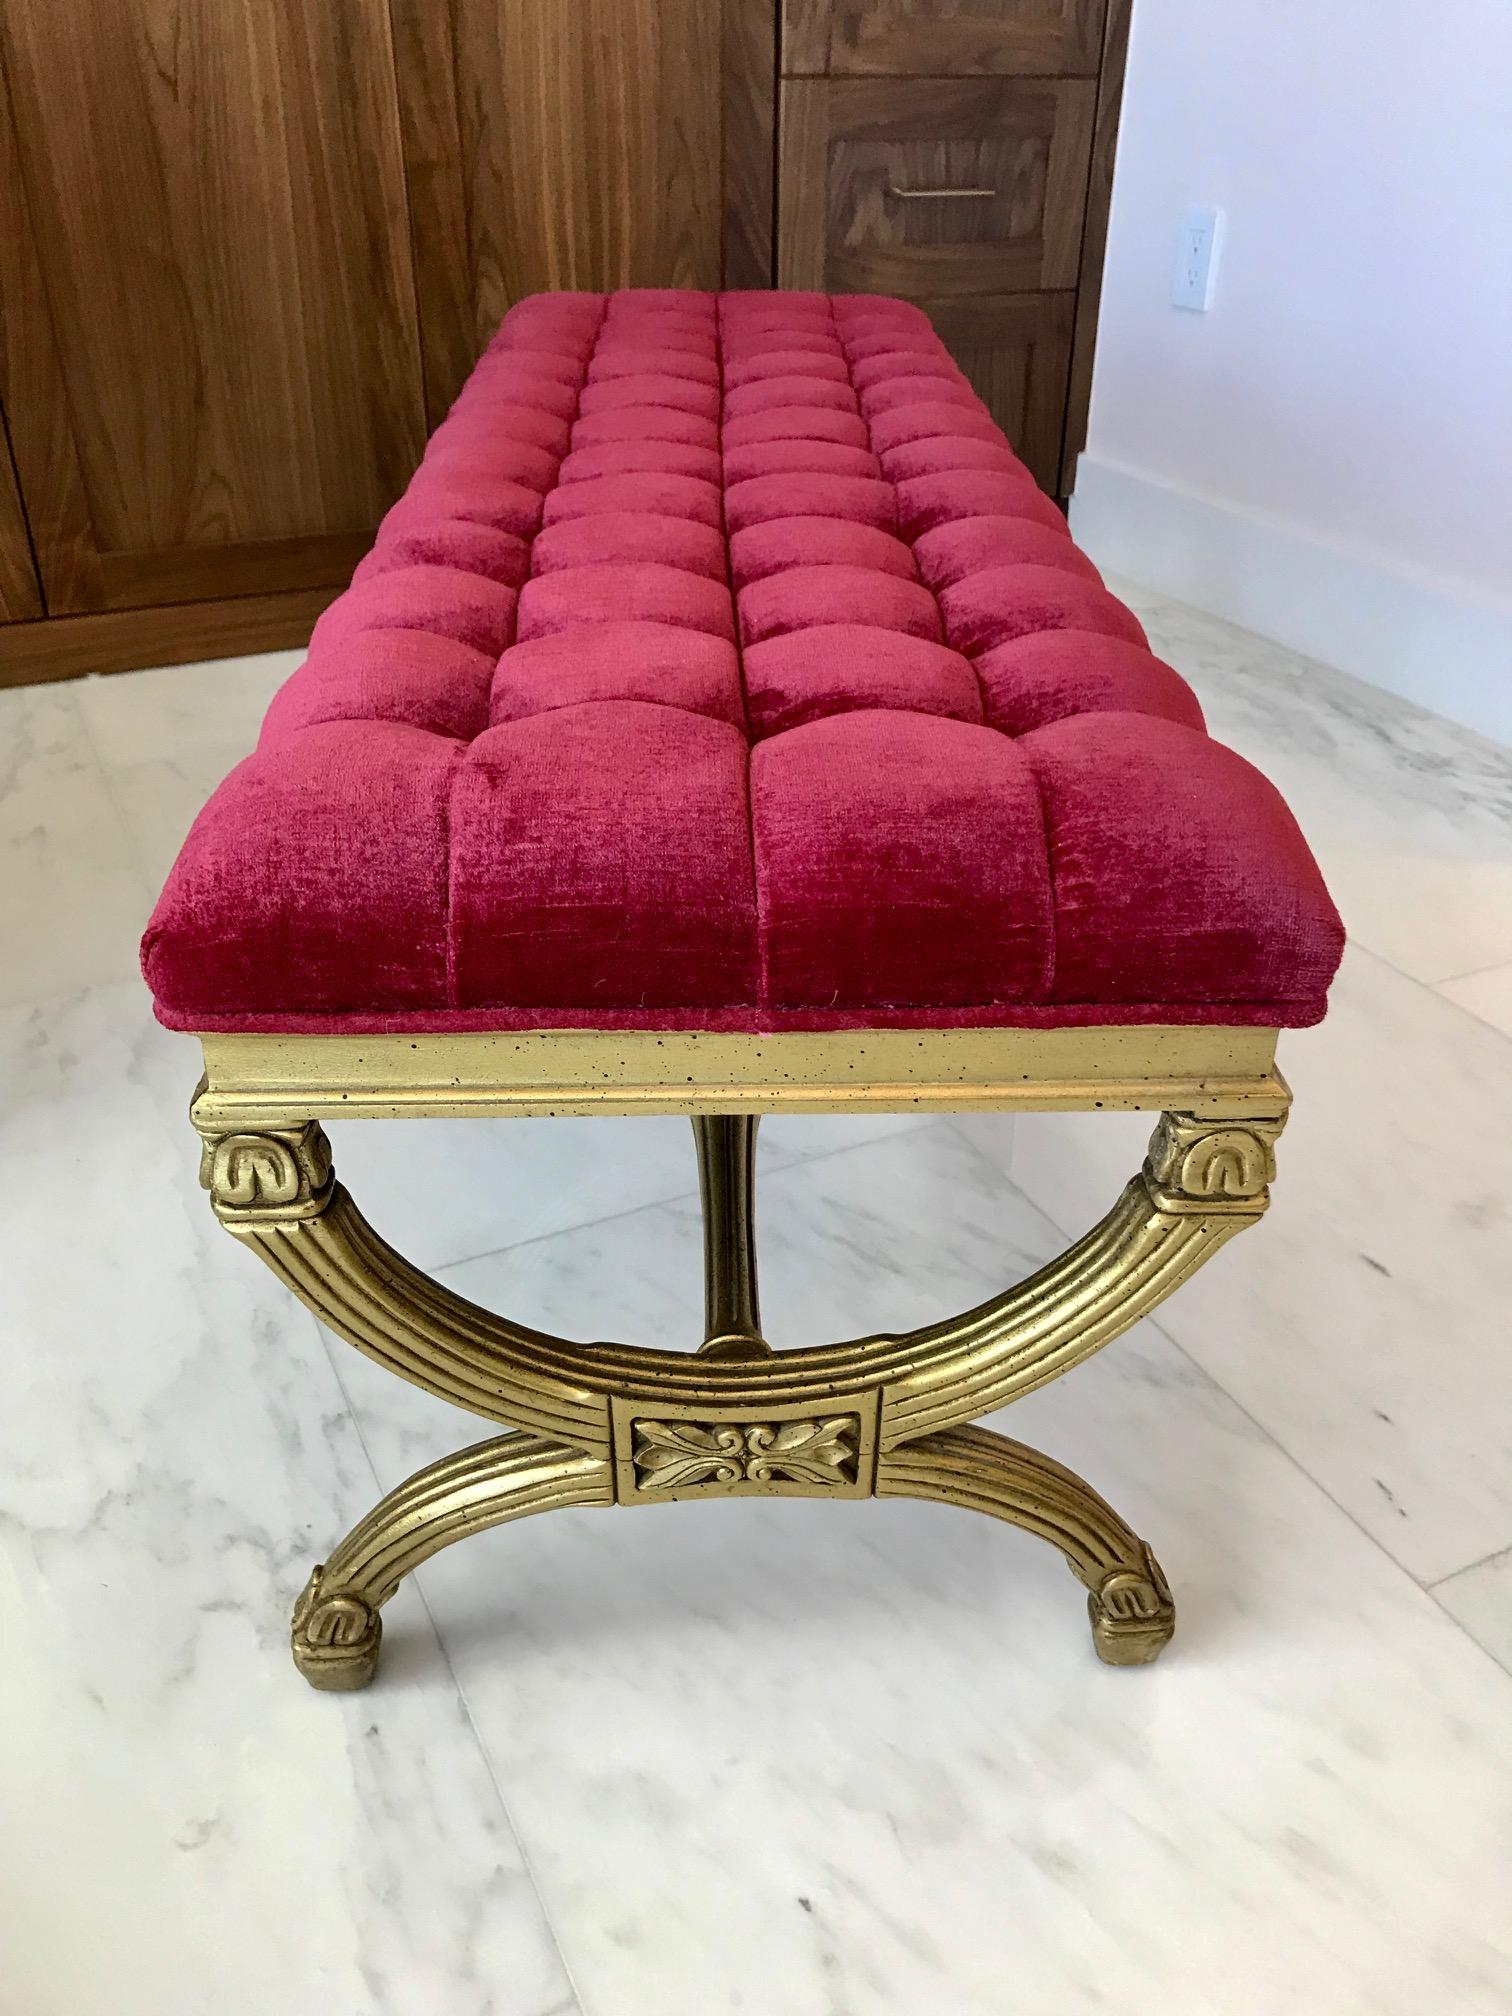 Upholstery Louis XVI Style Gilded Bench with Tufted Seat Design, Italy